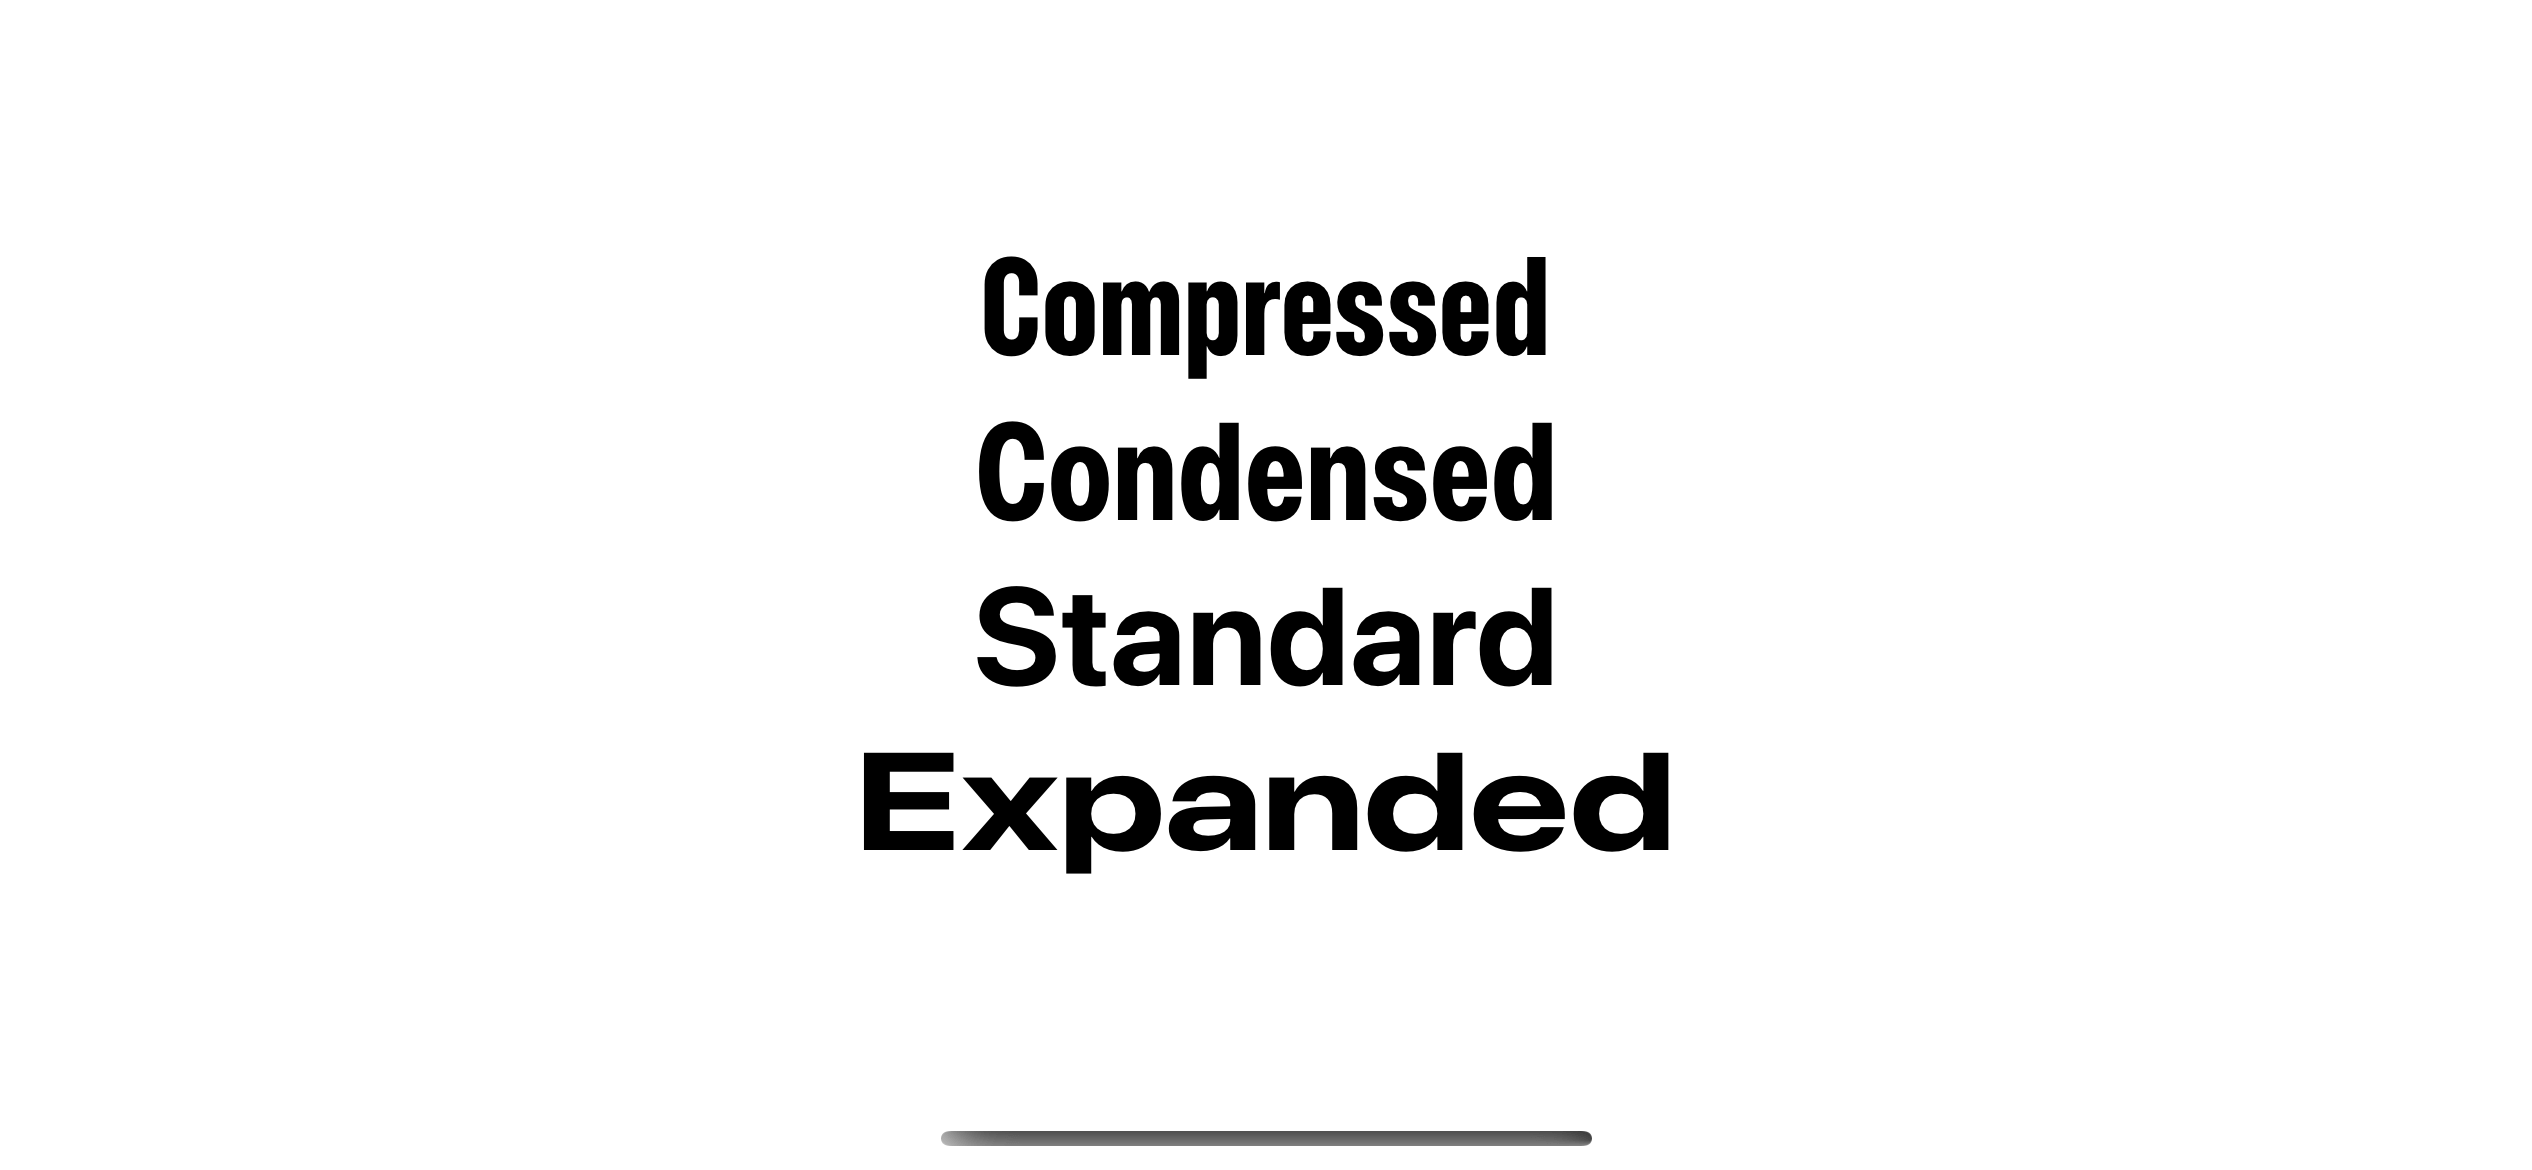 Compressed, condensed, standard, and expanded width style.